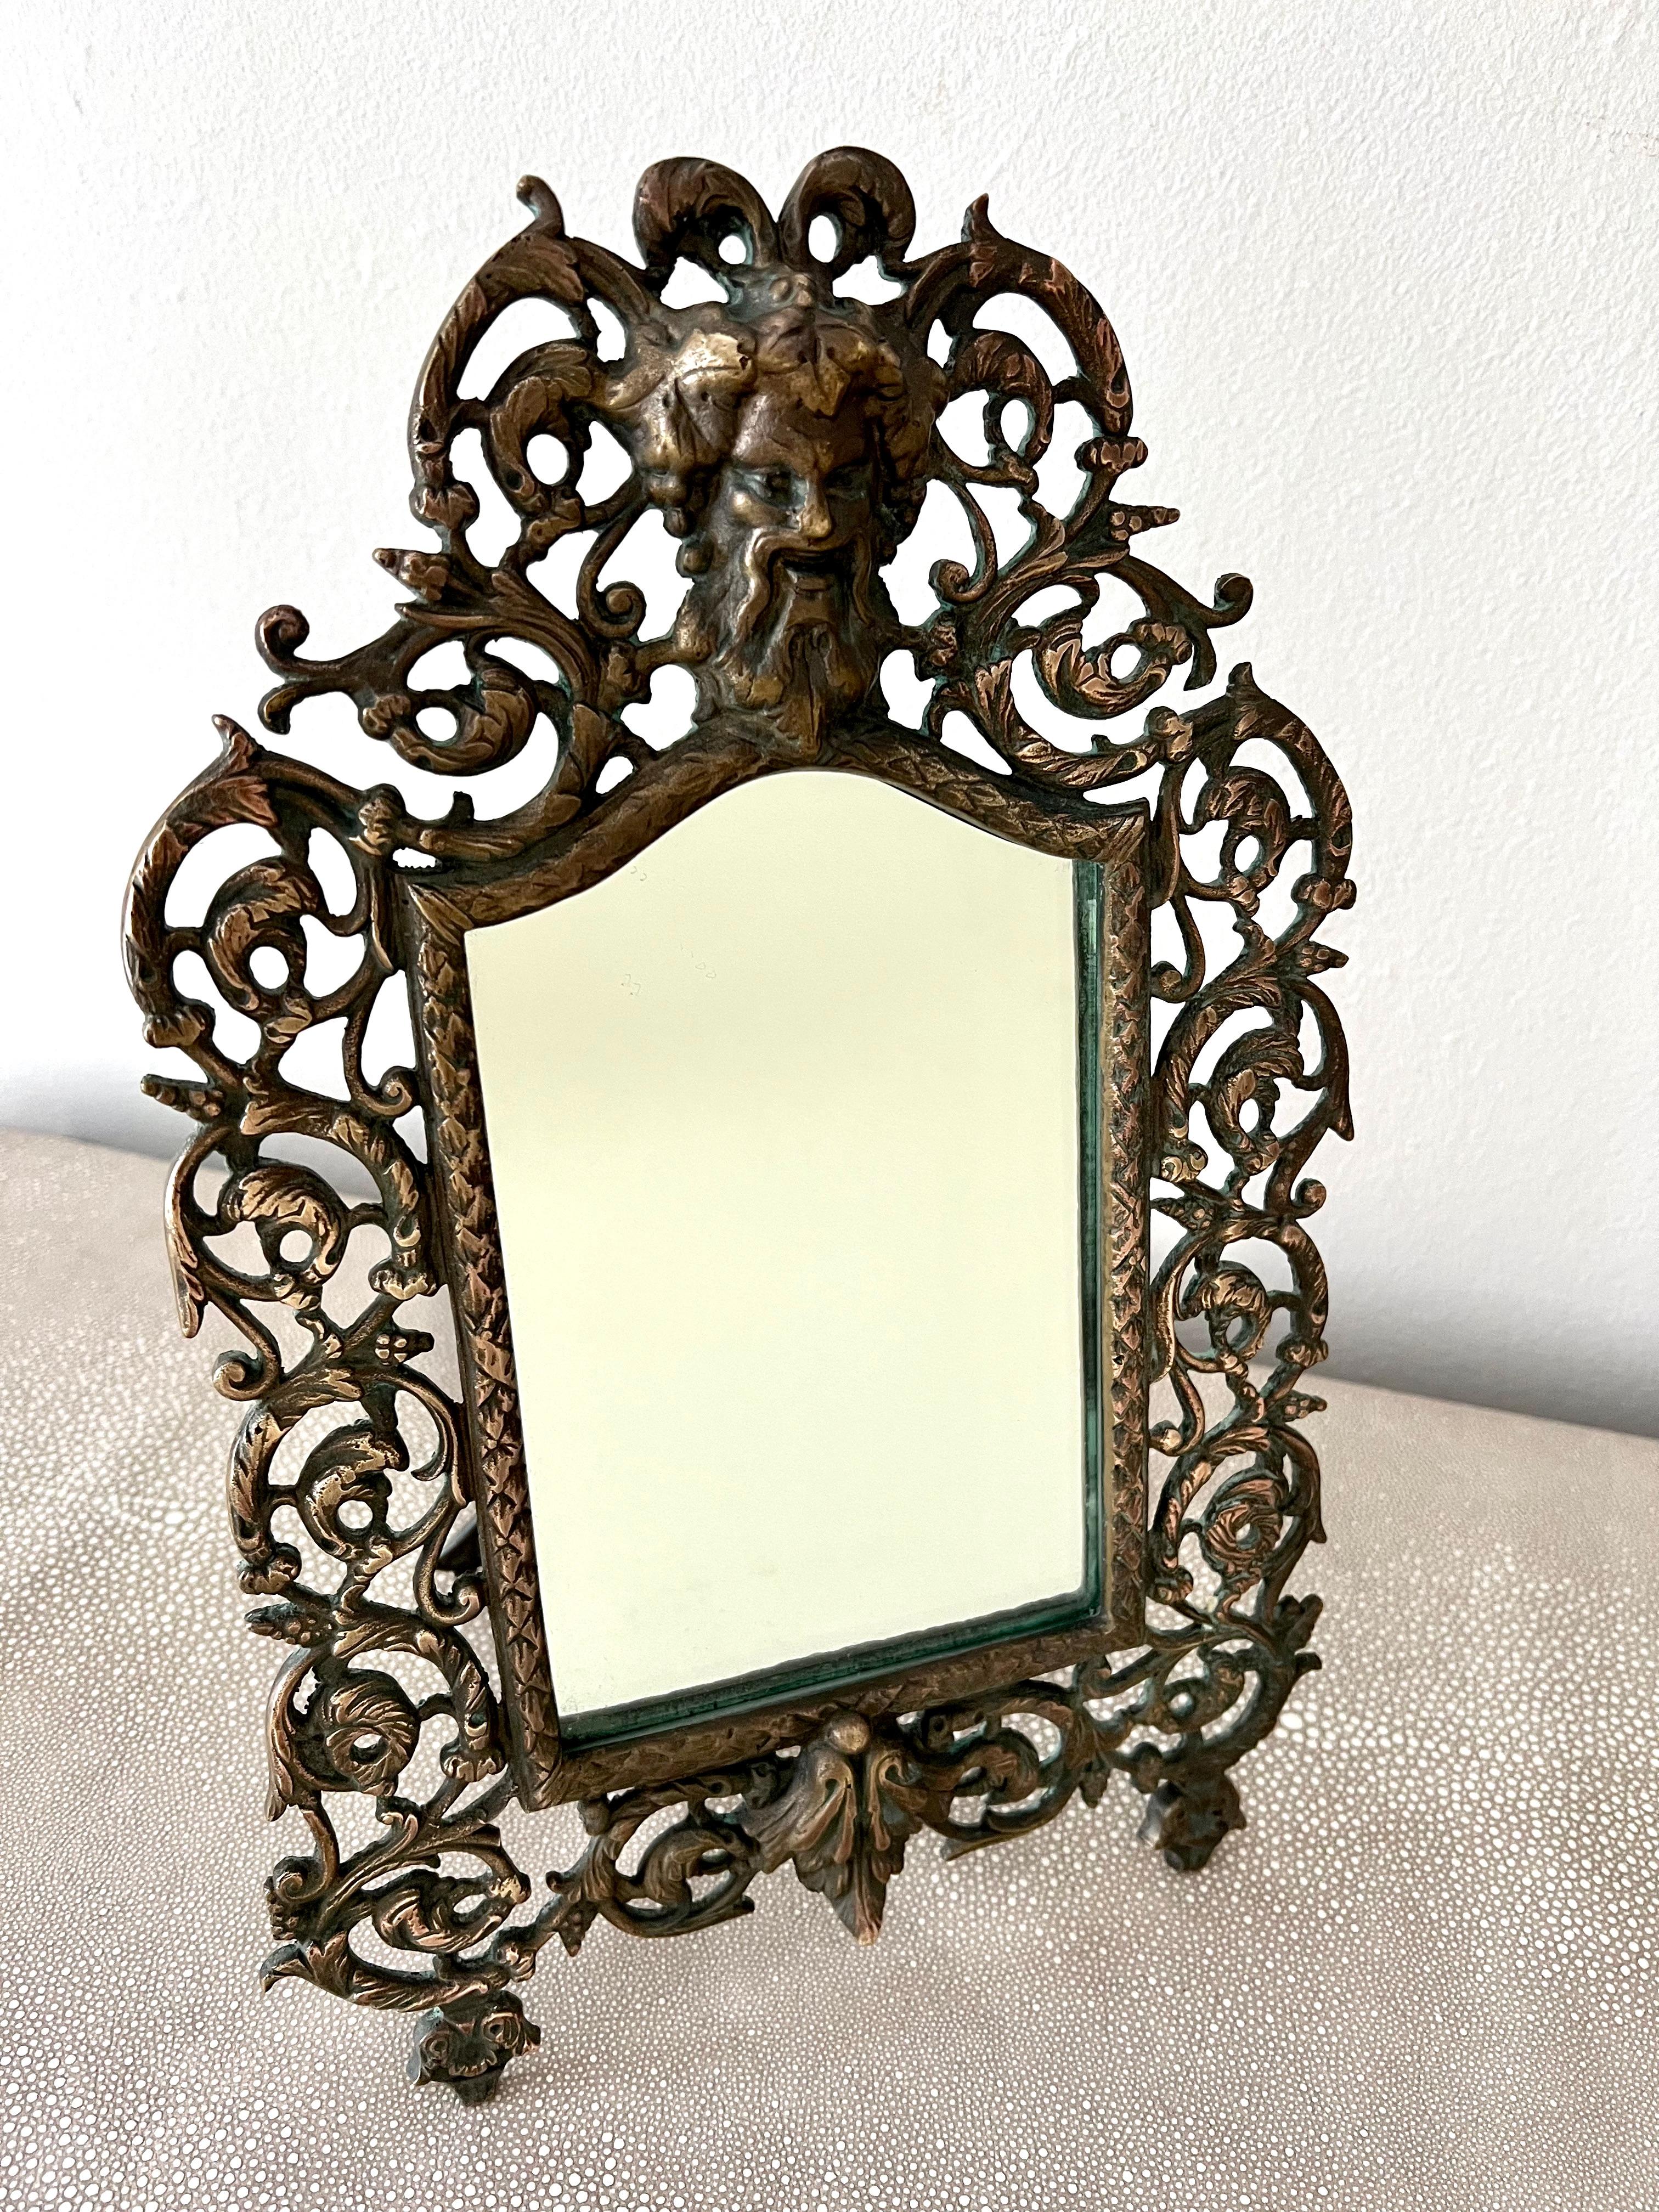 Brass and Copper P. E. Guerin Framed Mirror with Repousse Satyr For Sale 4